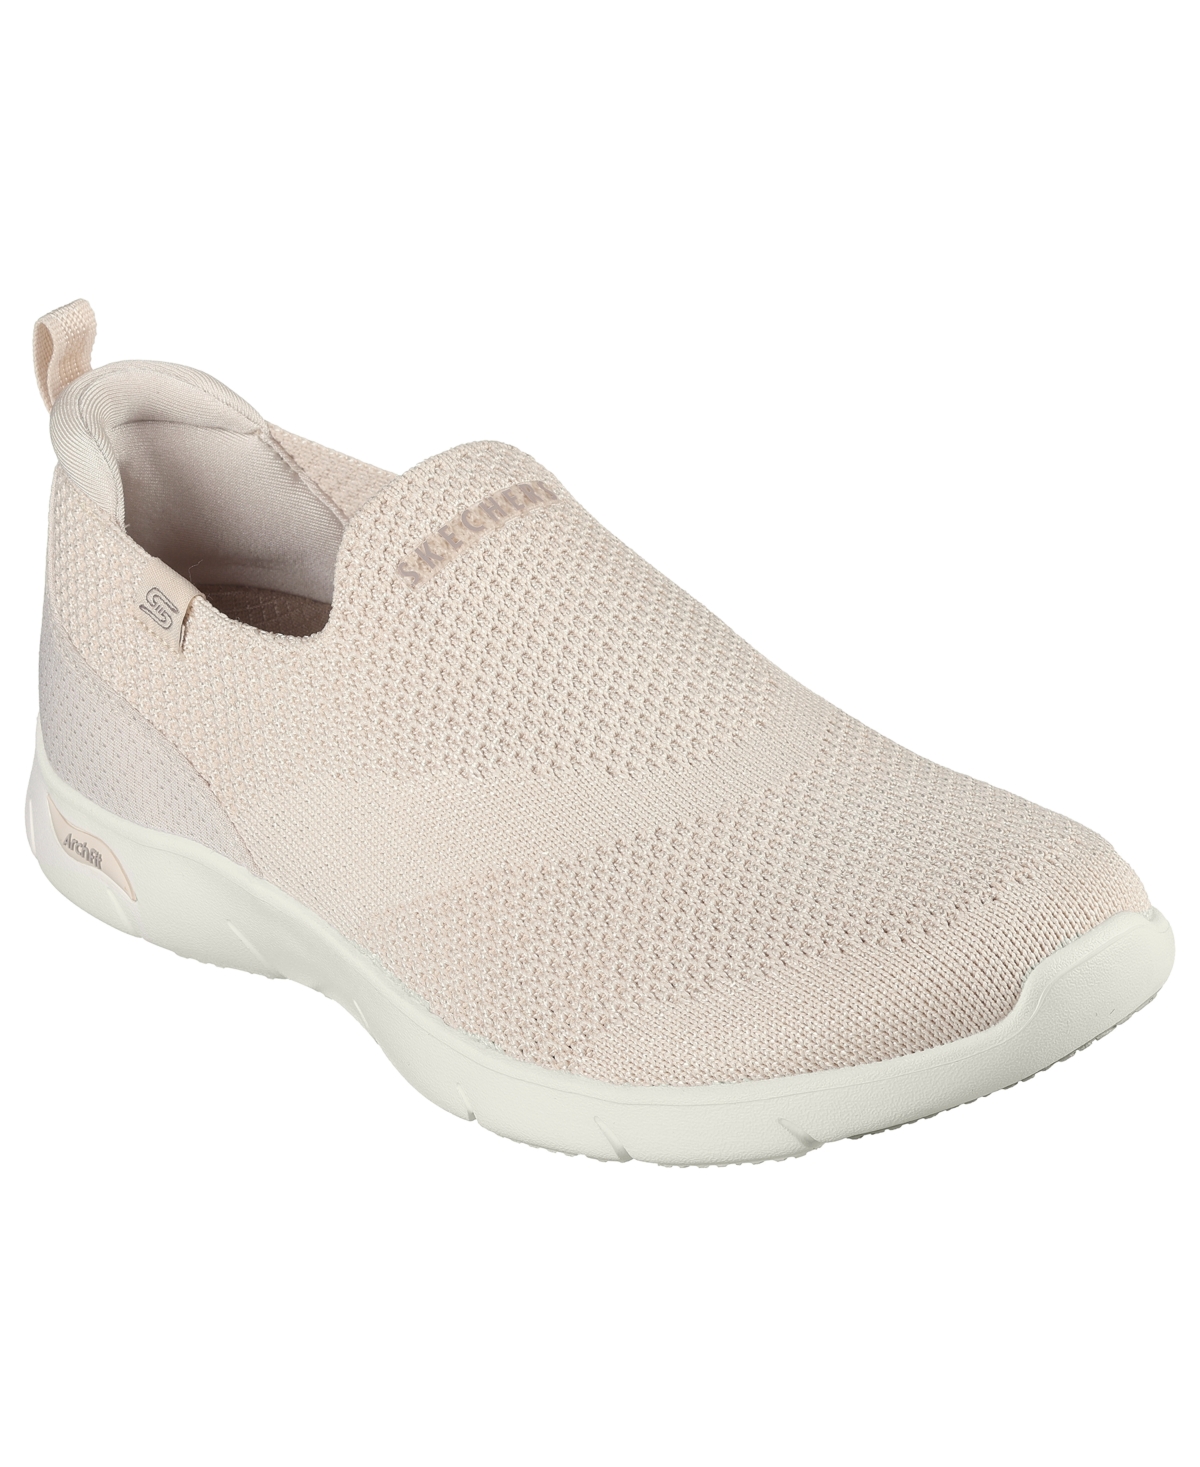 Women's Arch Fit Refine-Iris Slip-On Casual Sneakers from Finish Line - Natural